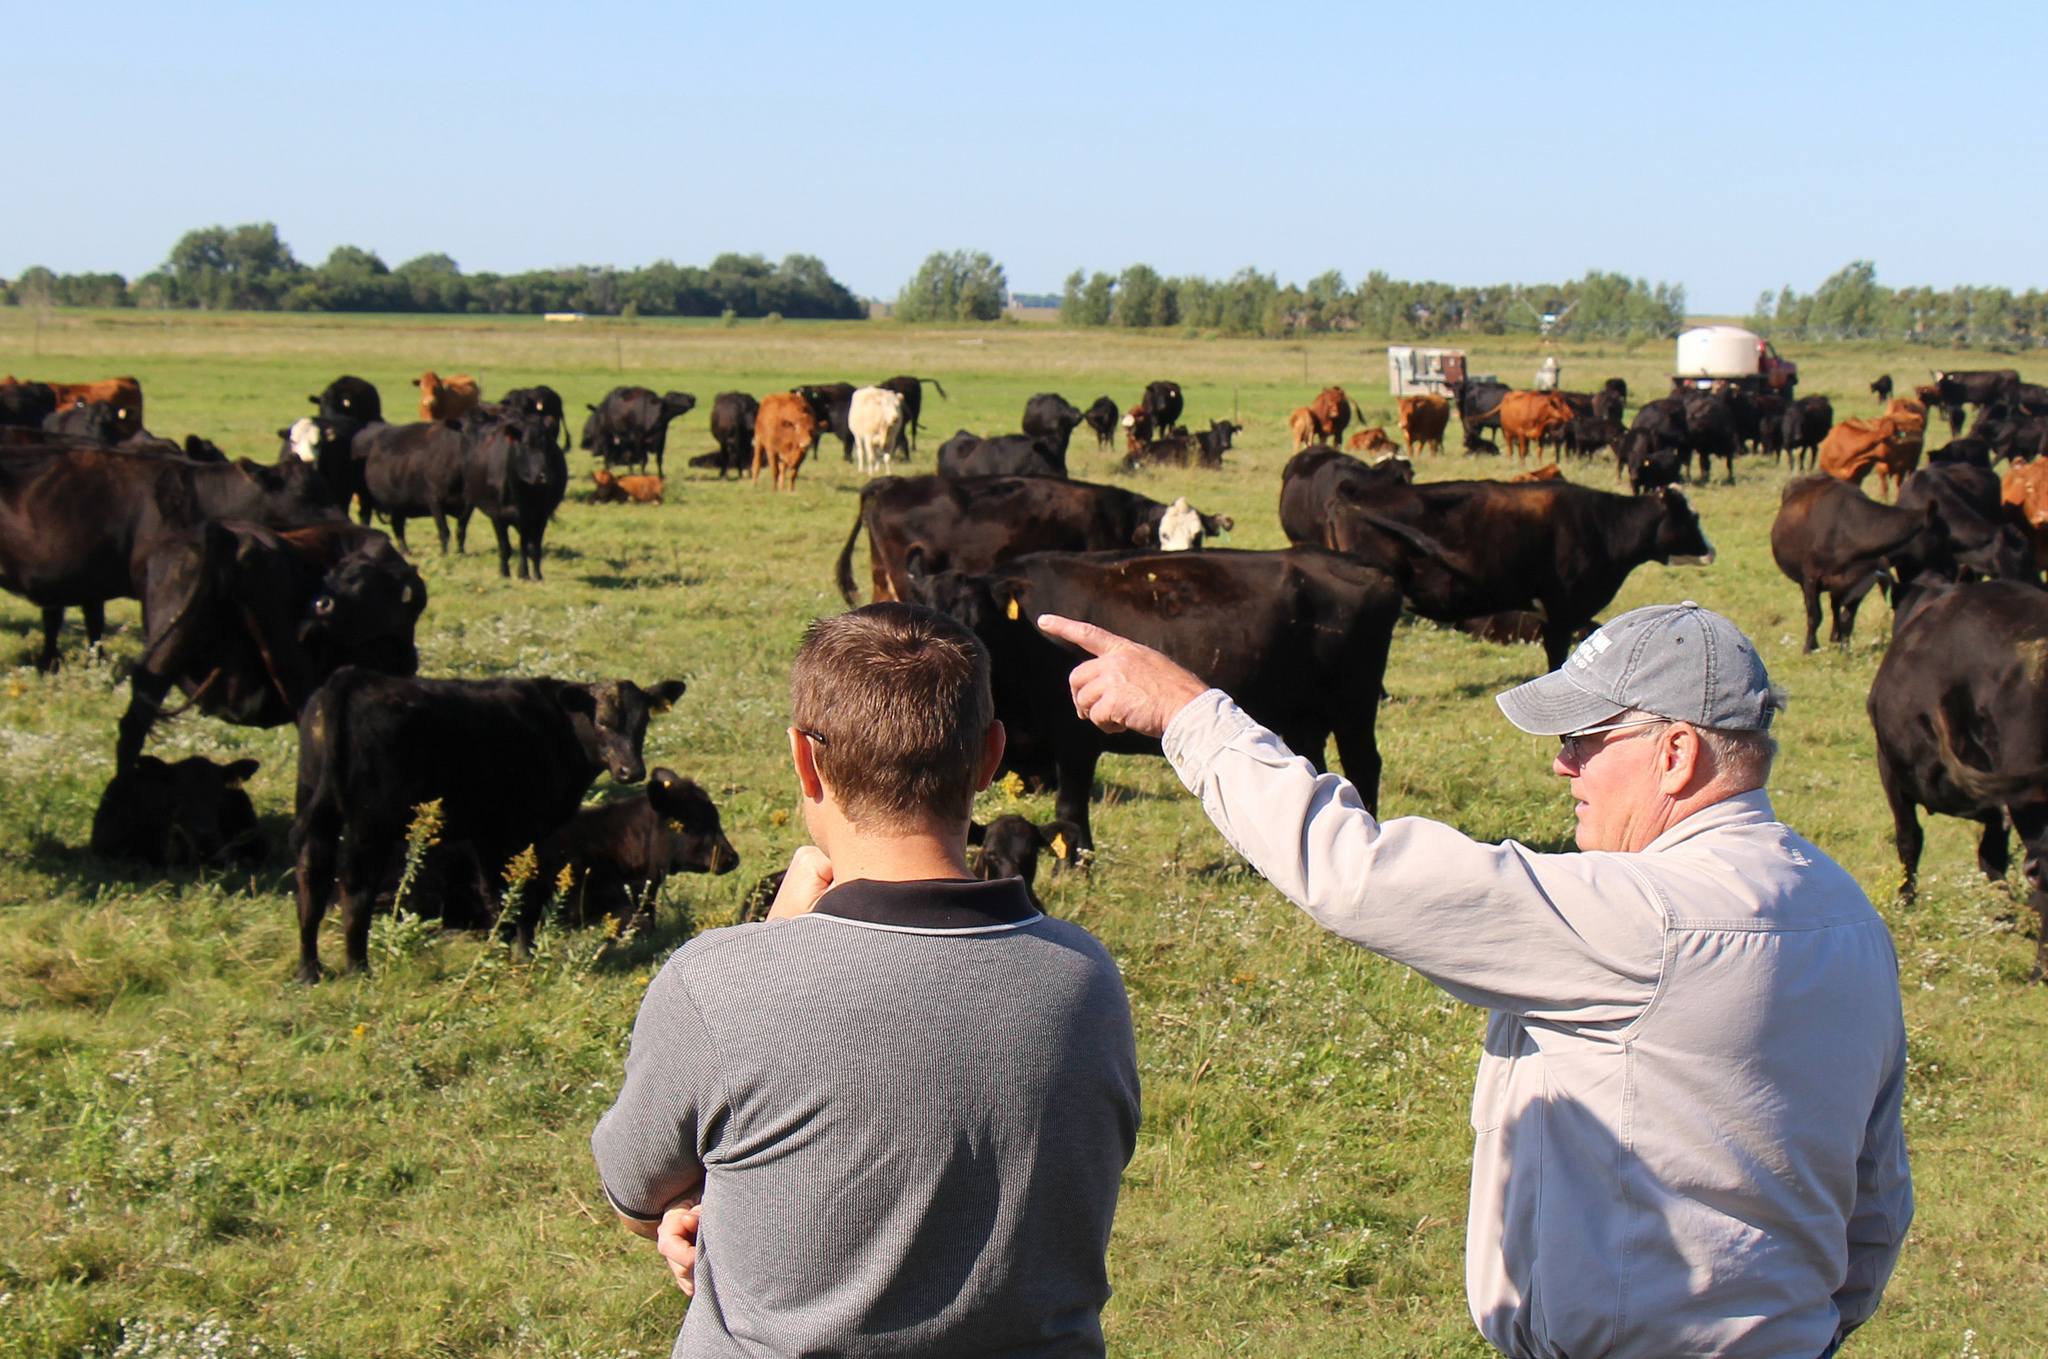 Two ranchers observing a herd of cattle at pasture.